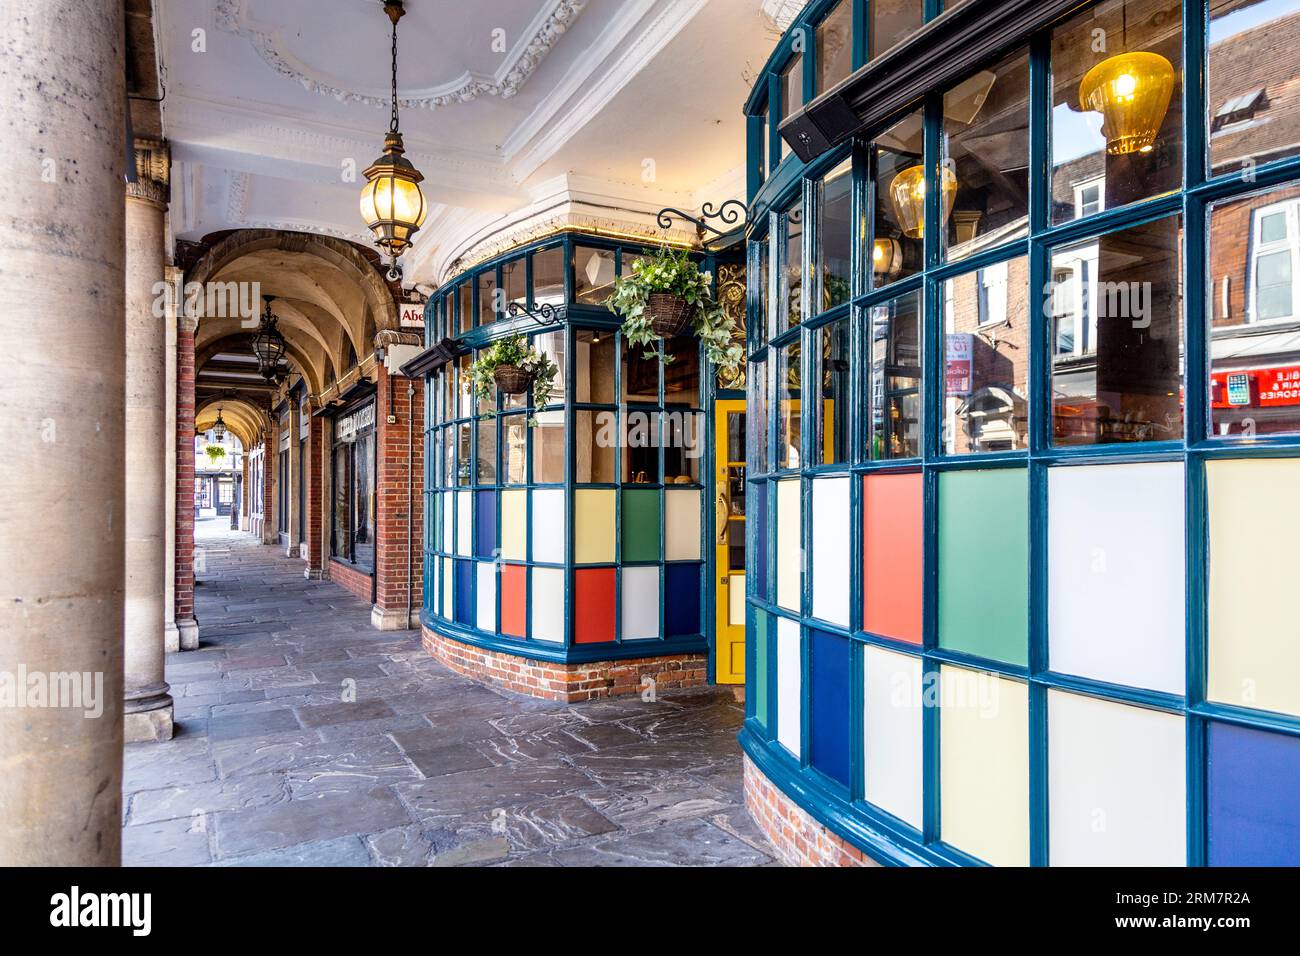 Colourful exterior of Jack & Alice restaurant in the Town Hall and Corn Exchange arcades, Farnham, Surrey, England Stock Photo